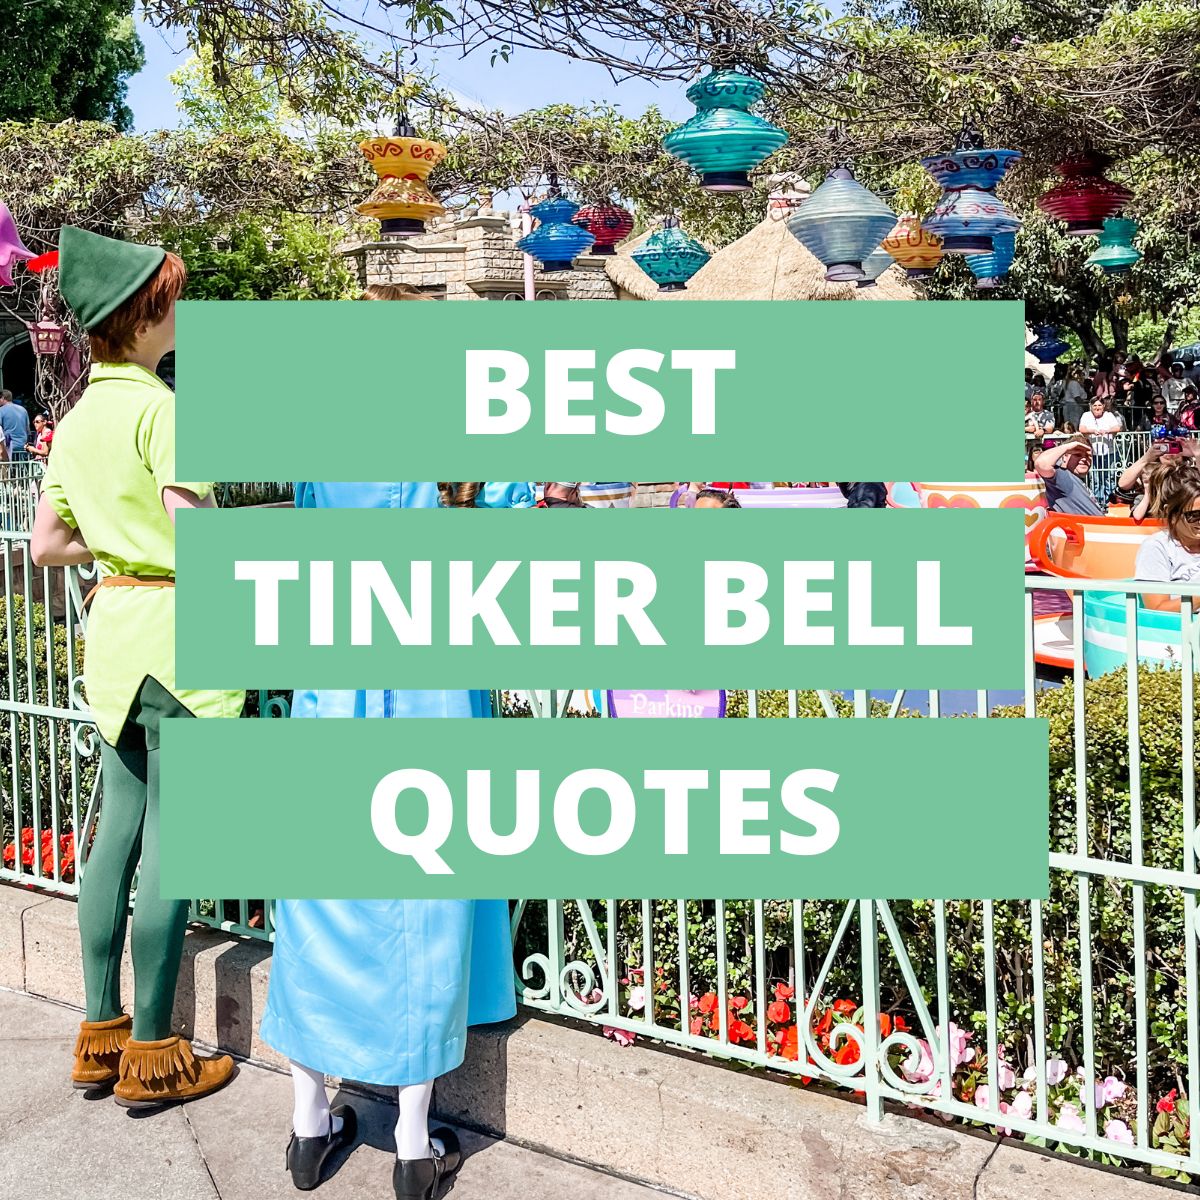 tinker bell quotes featured image